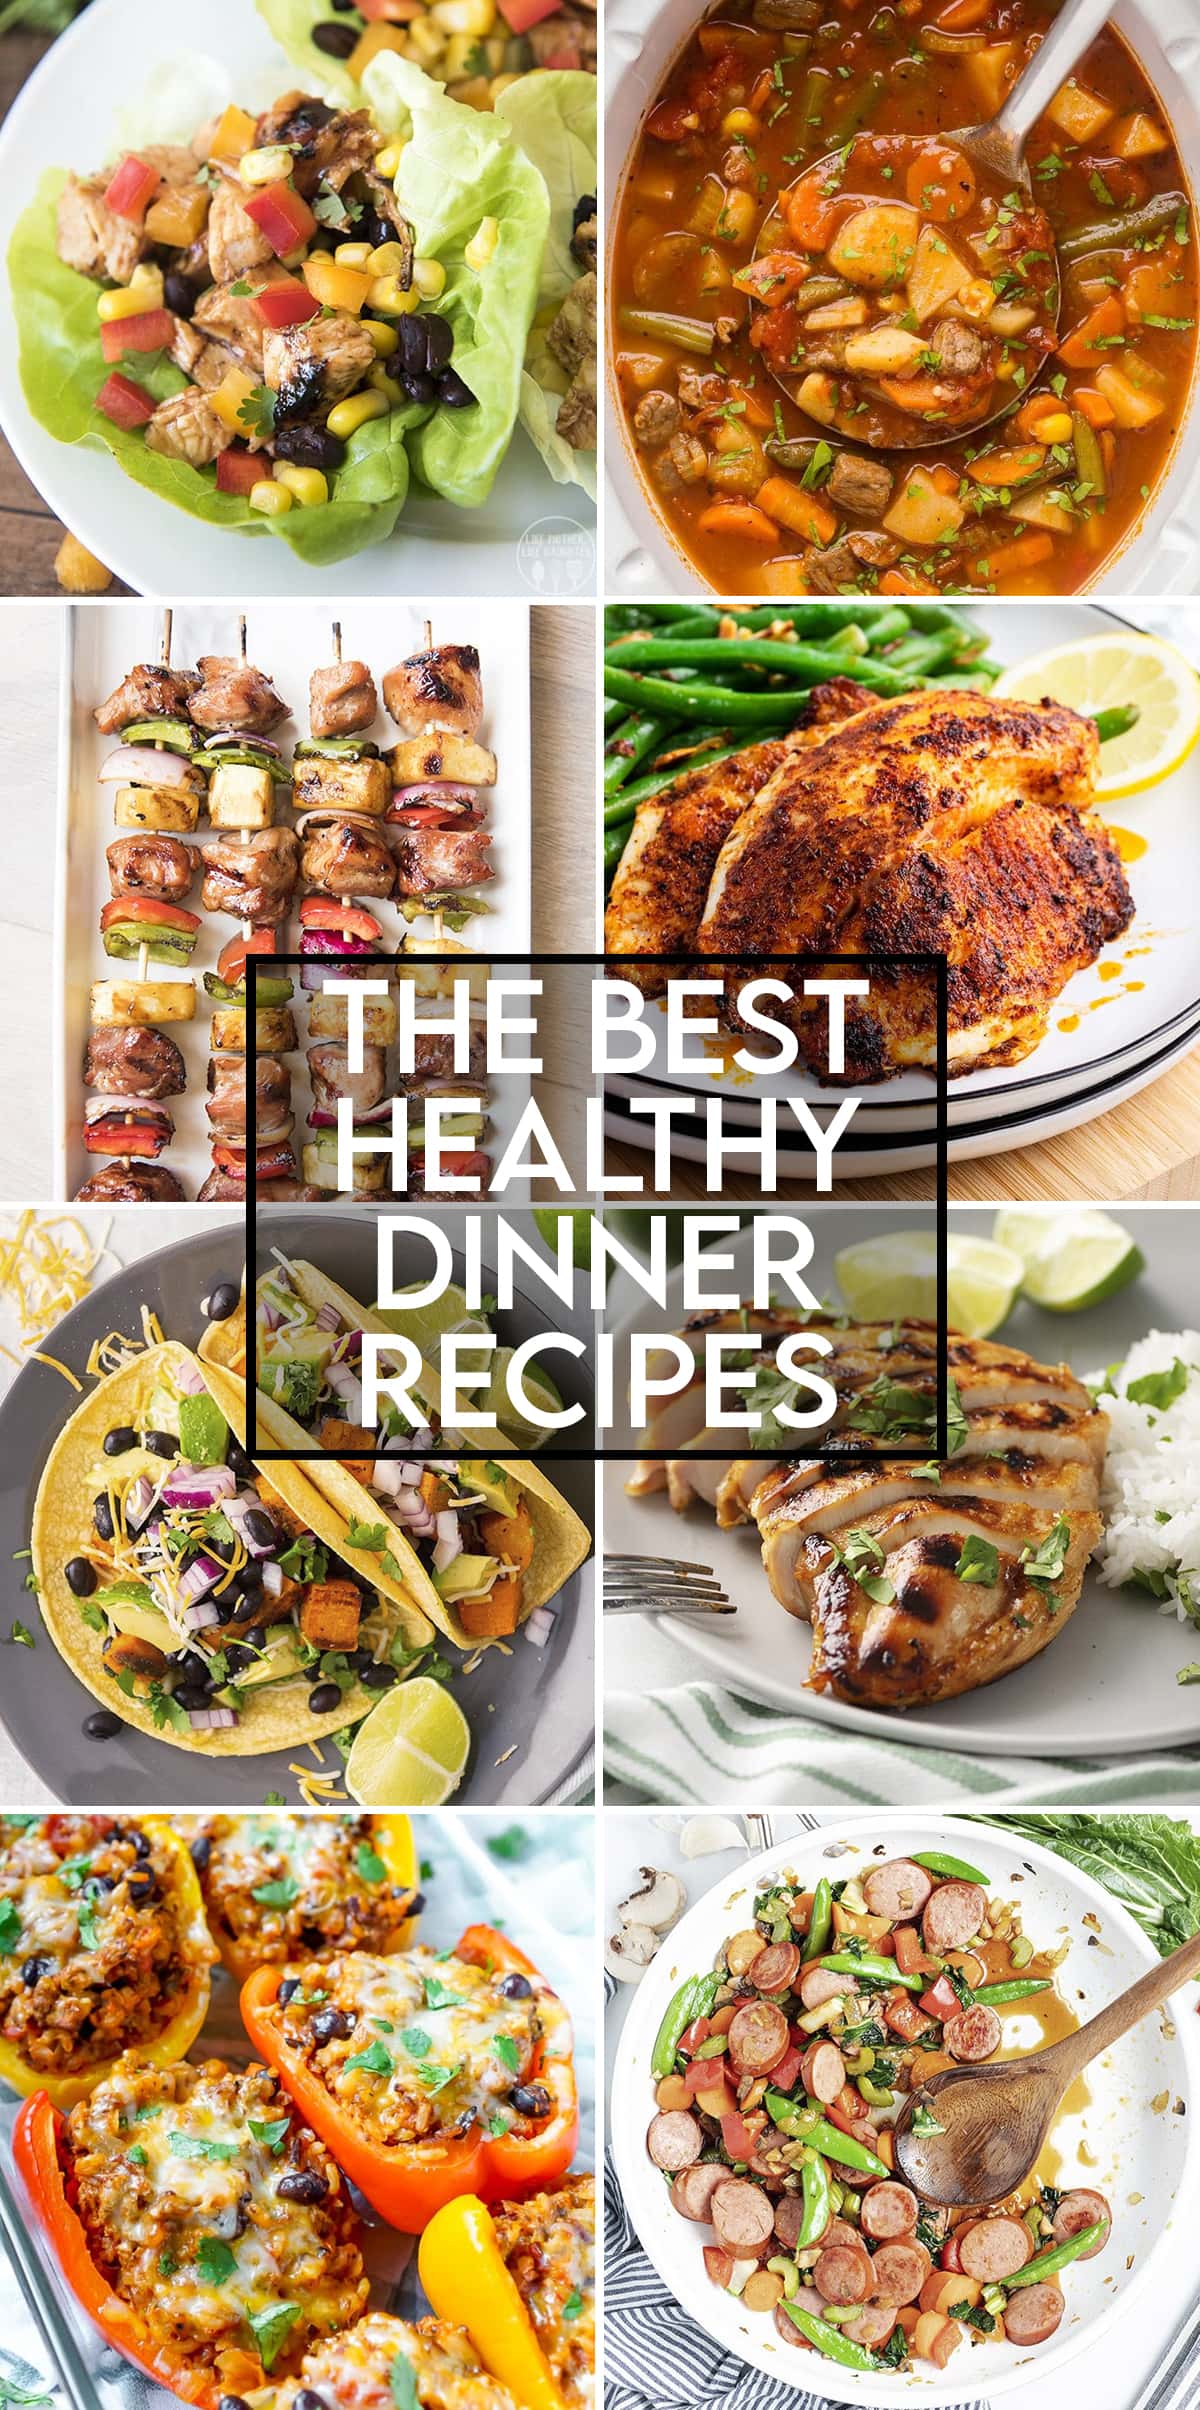 Four image collage for the best healthy dinner recipes.